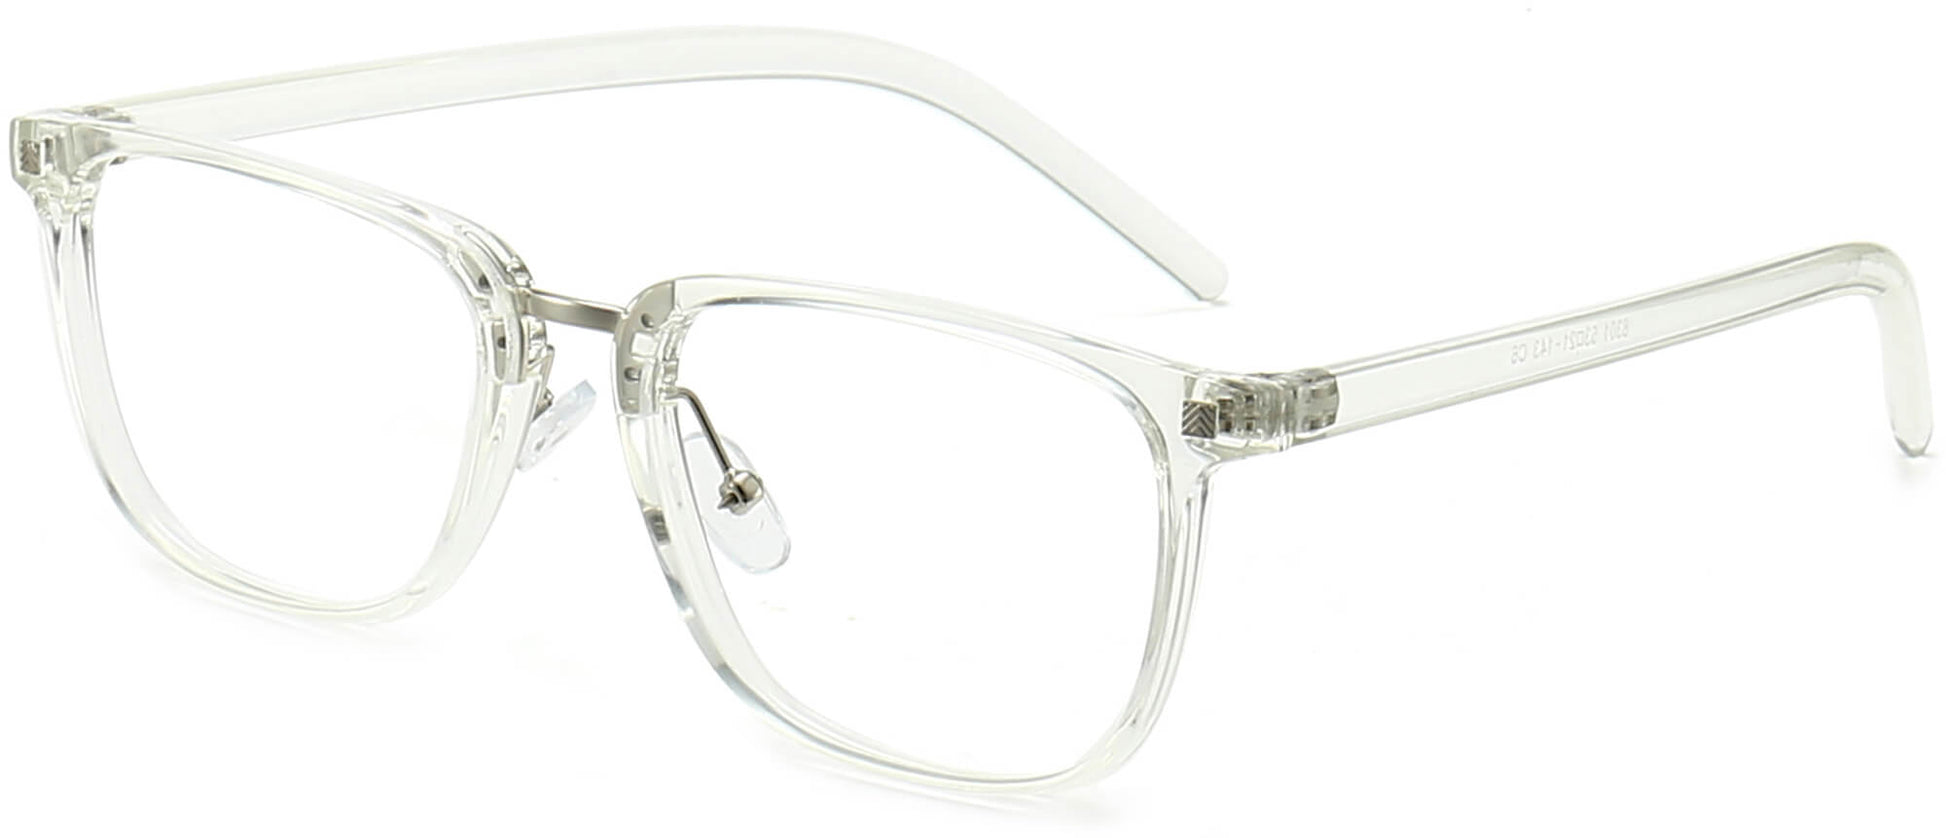 Samir Square Clear Eyeglasses from ANRRI, angle view